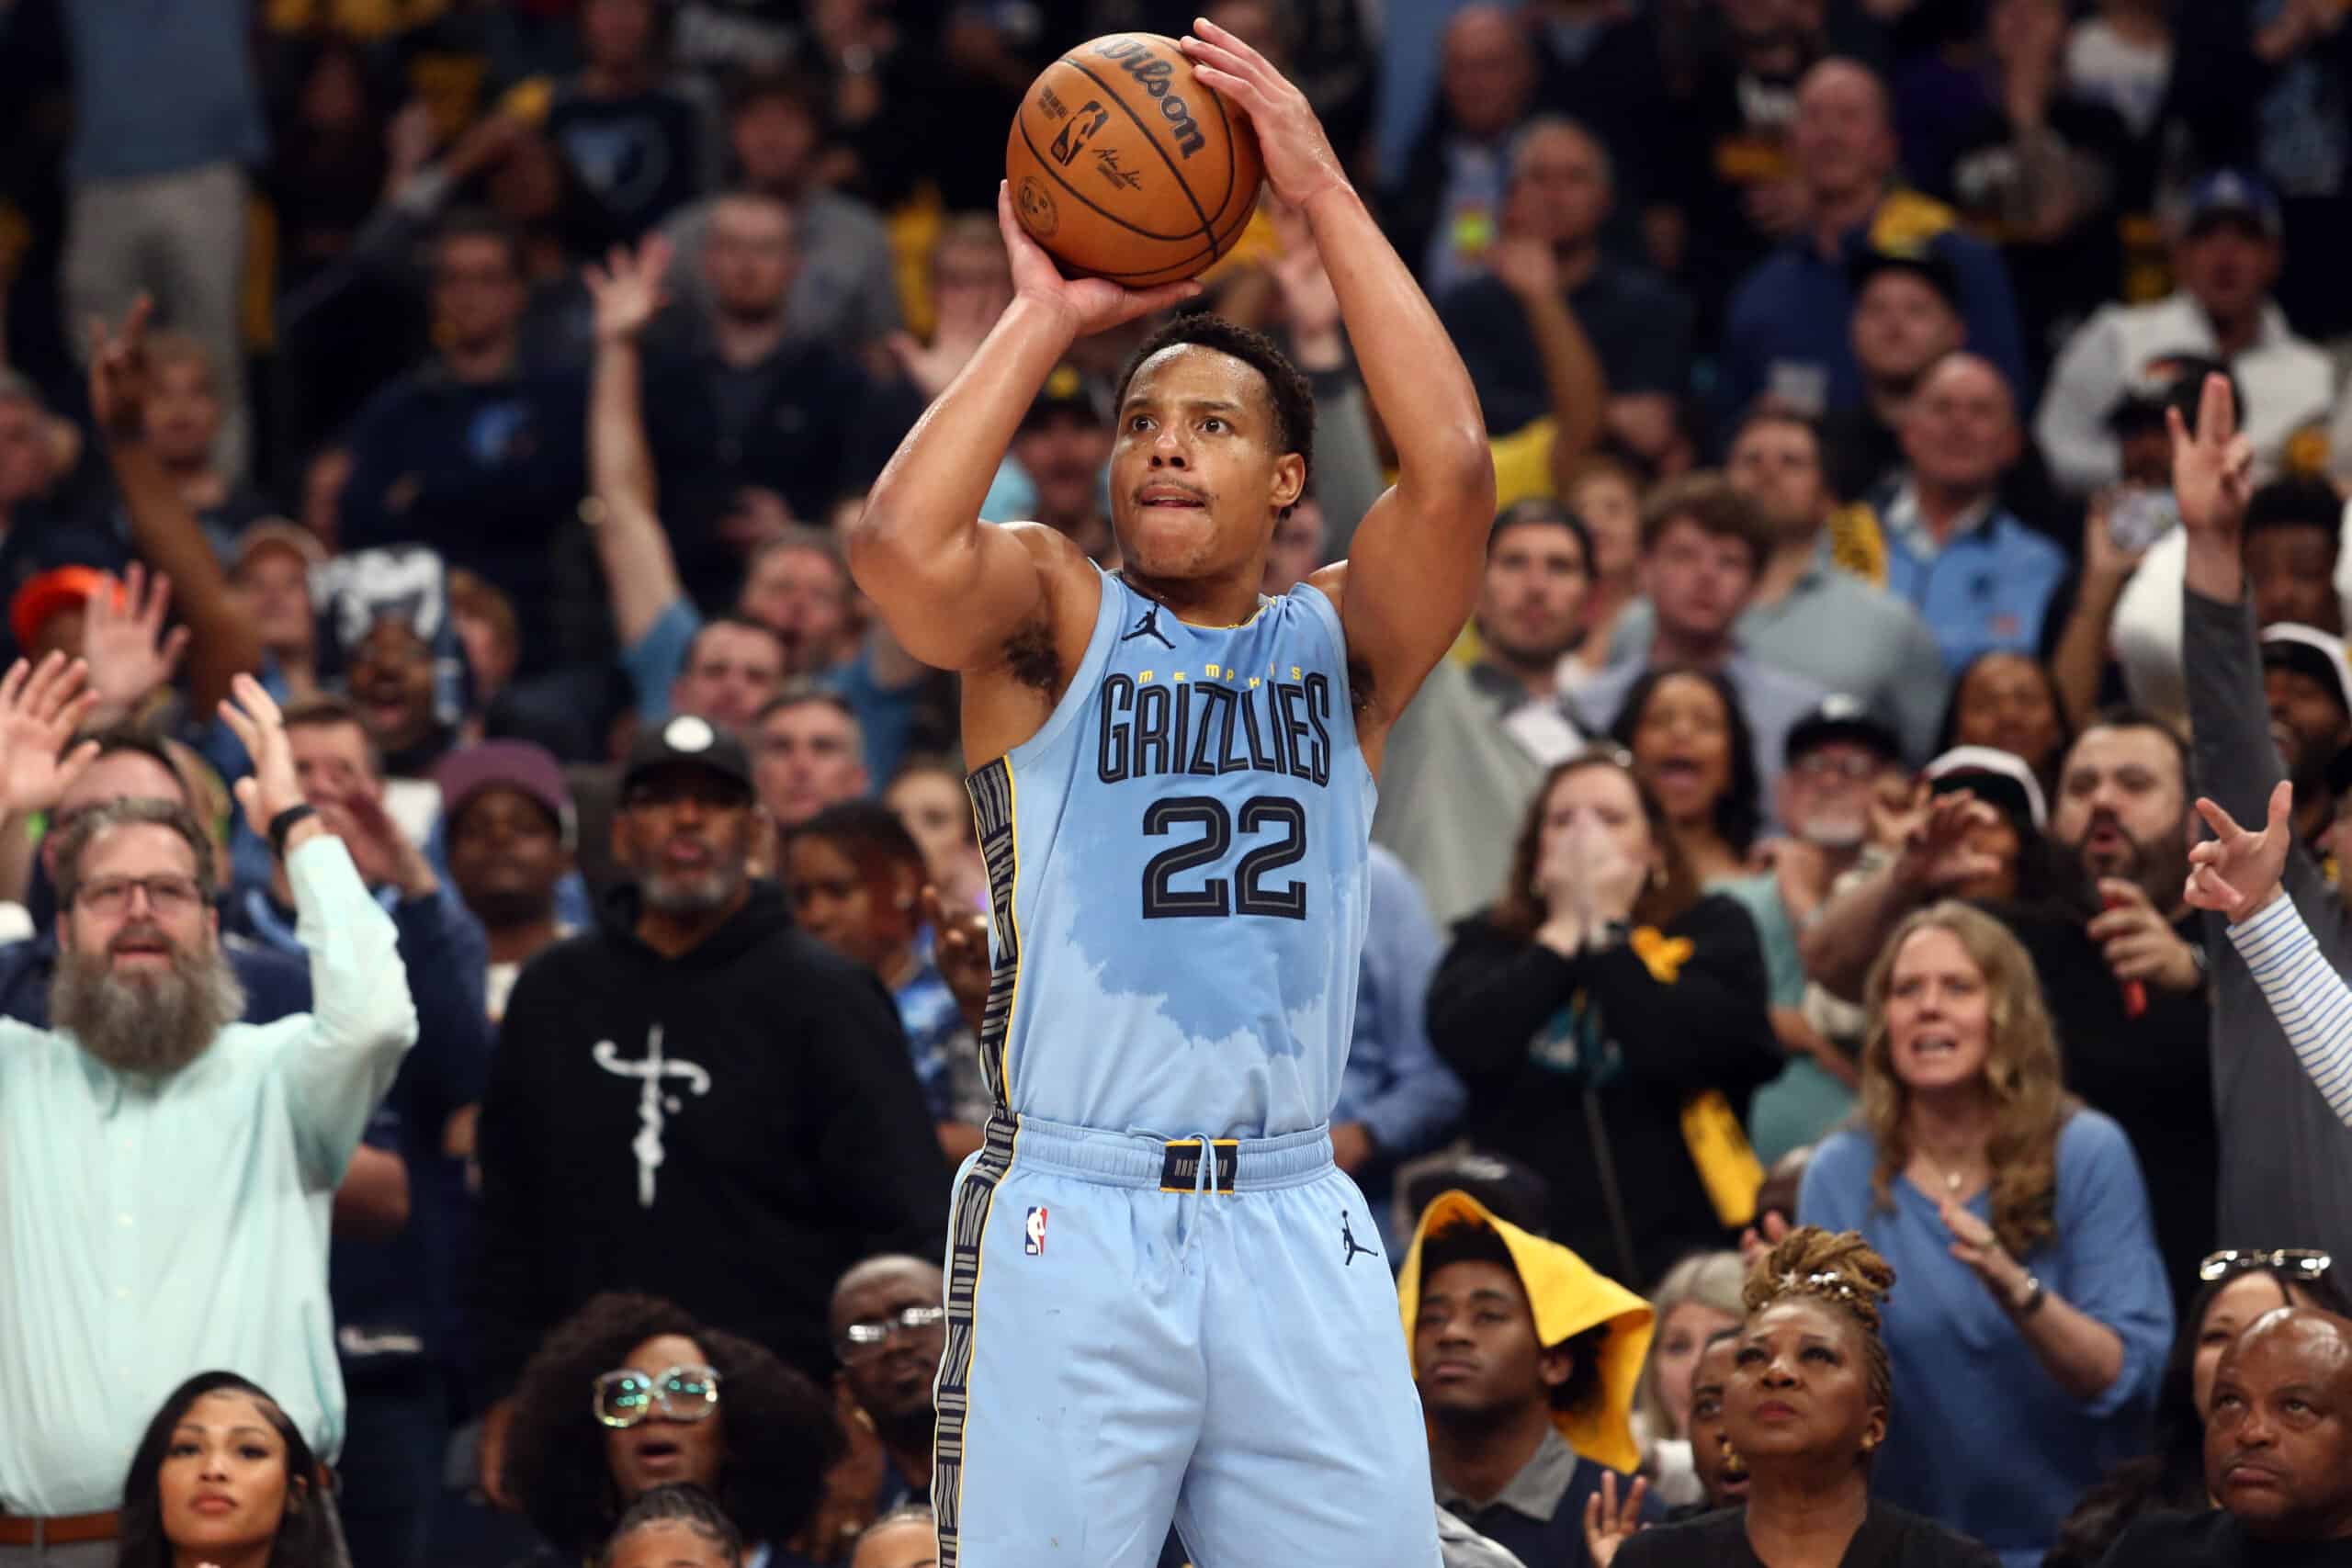 Featured image for “GBB Live: Grizzlies Future in International Play, Desmond Bane is a Top 50 NBA Player”